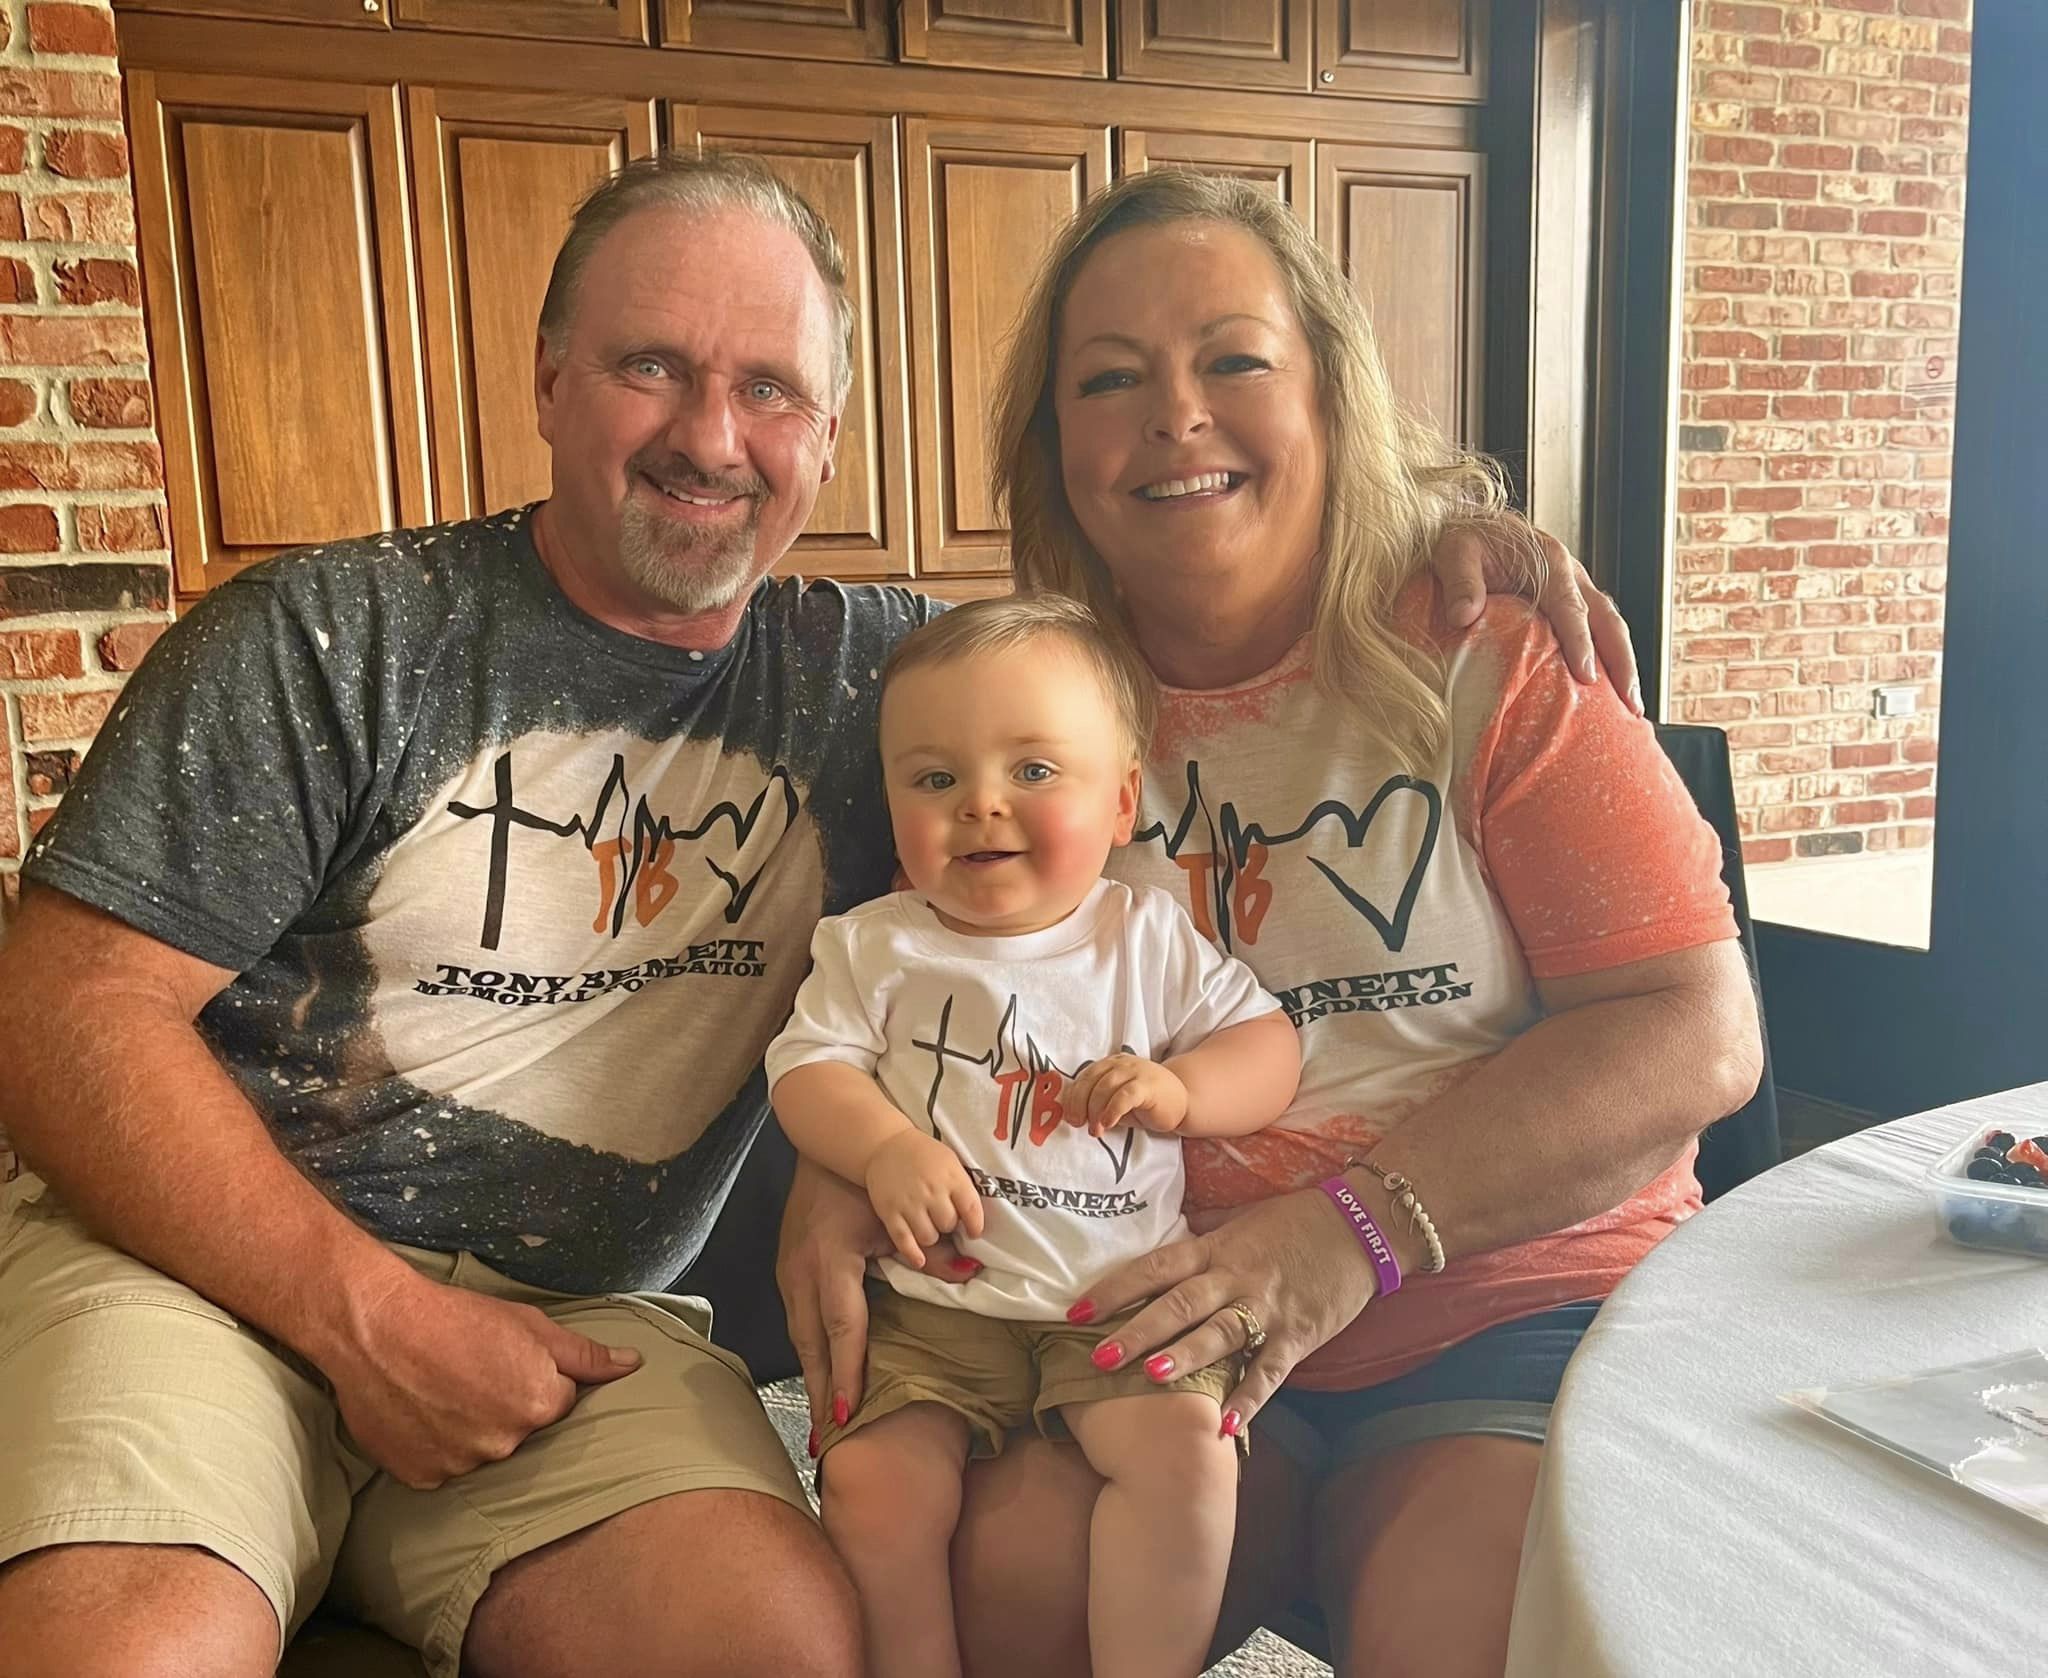 A family sitting together in TB Memorial shirts and smiling at the camera.